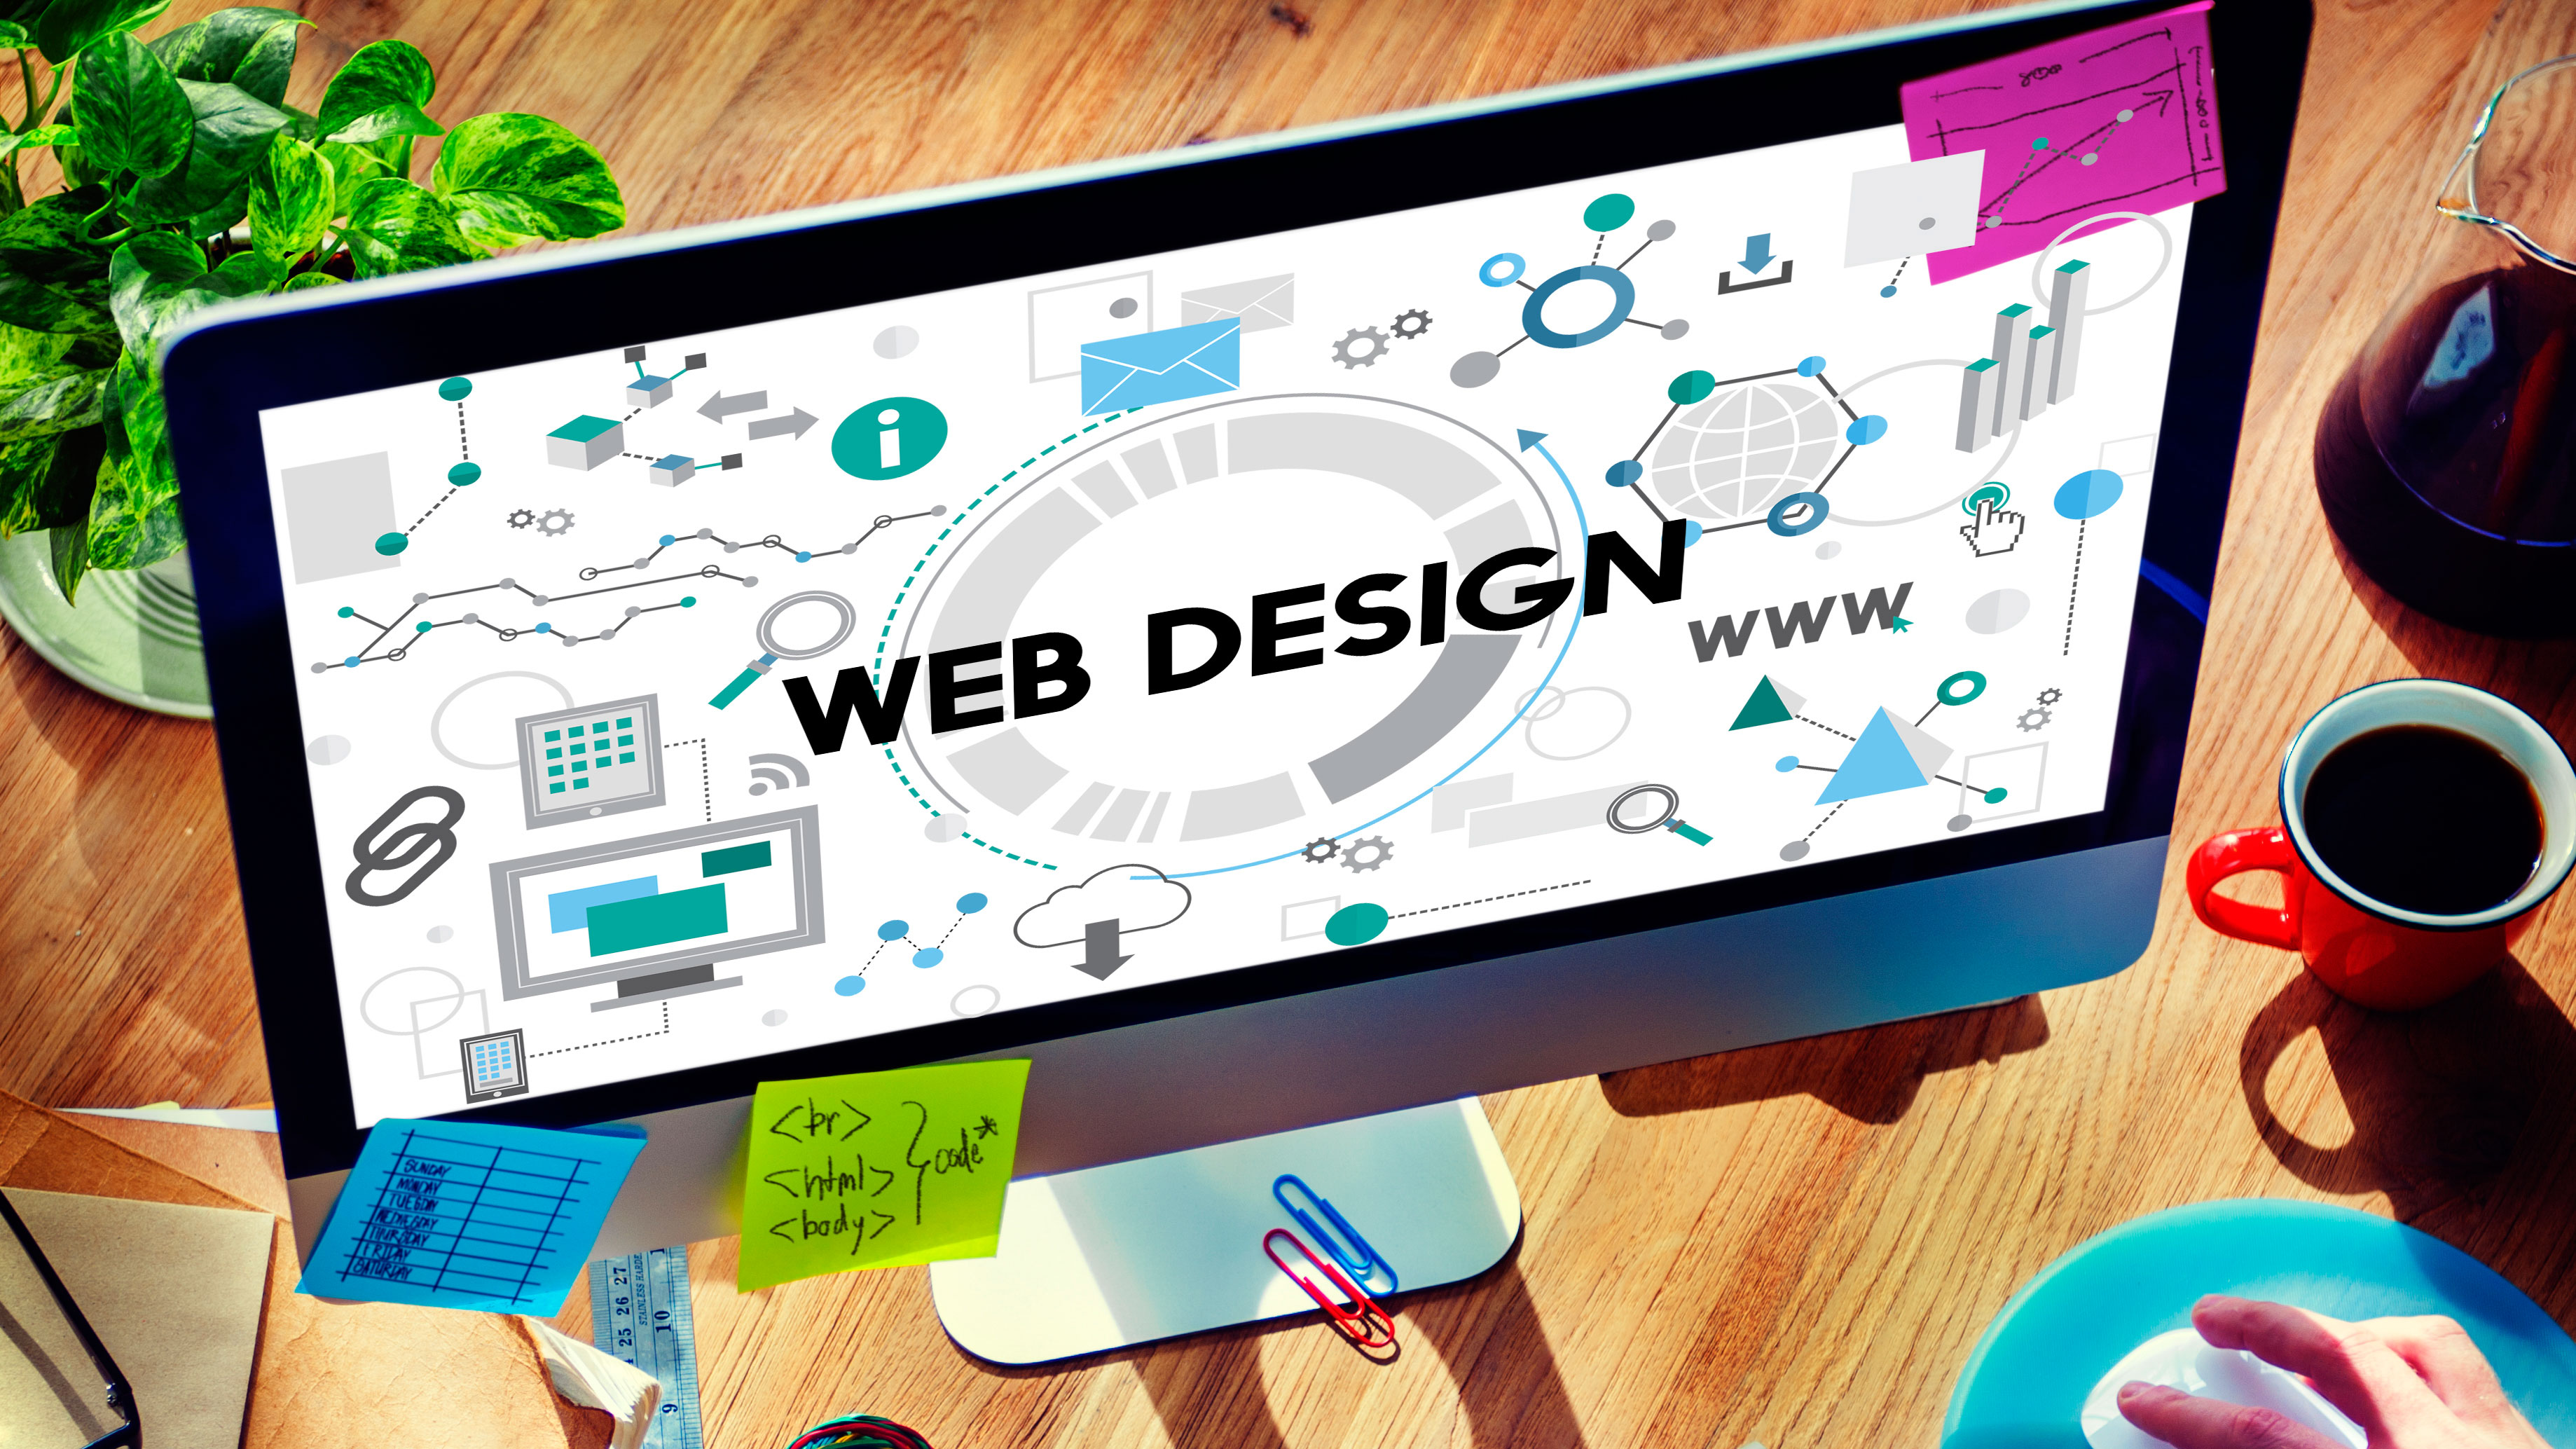 Web Design is an essential part of SEO strategy